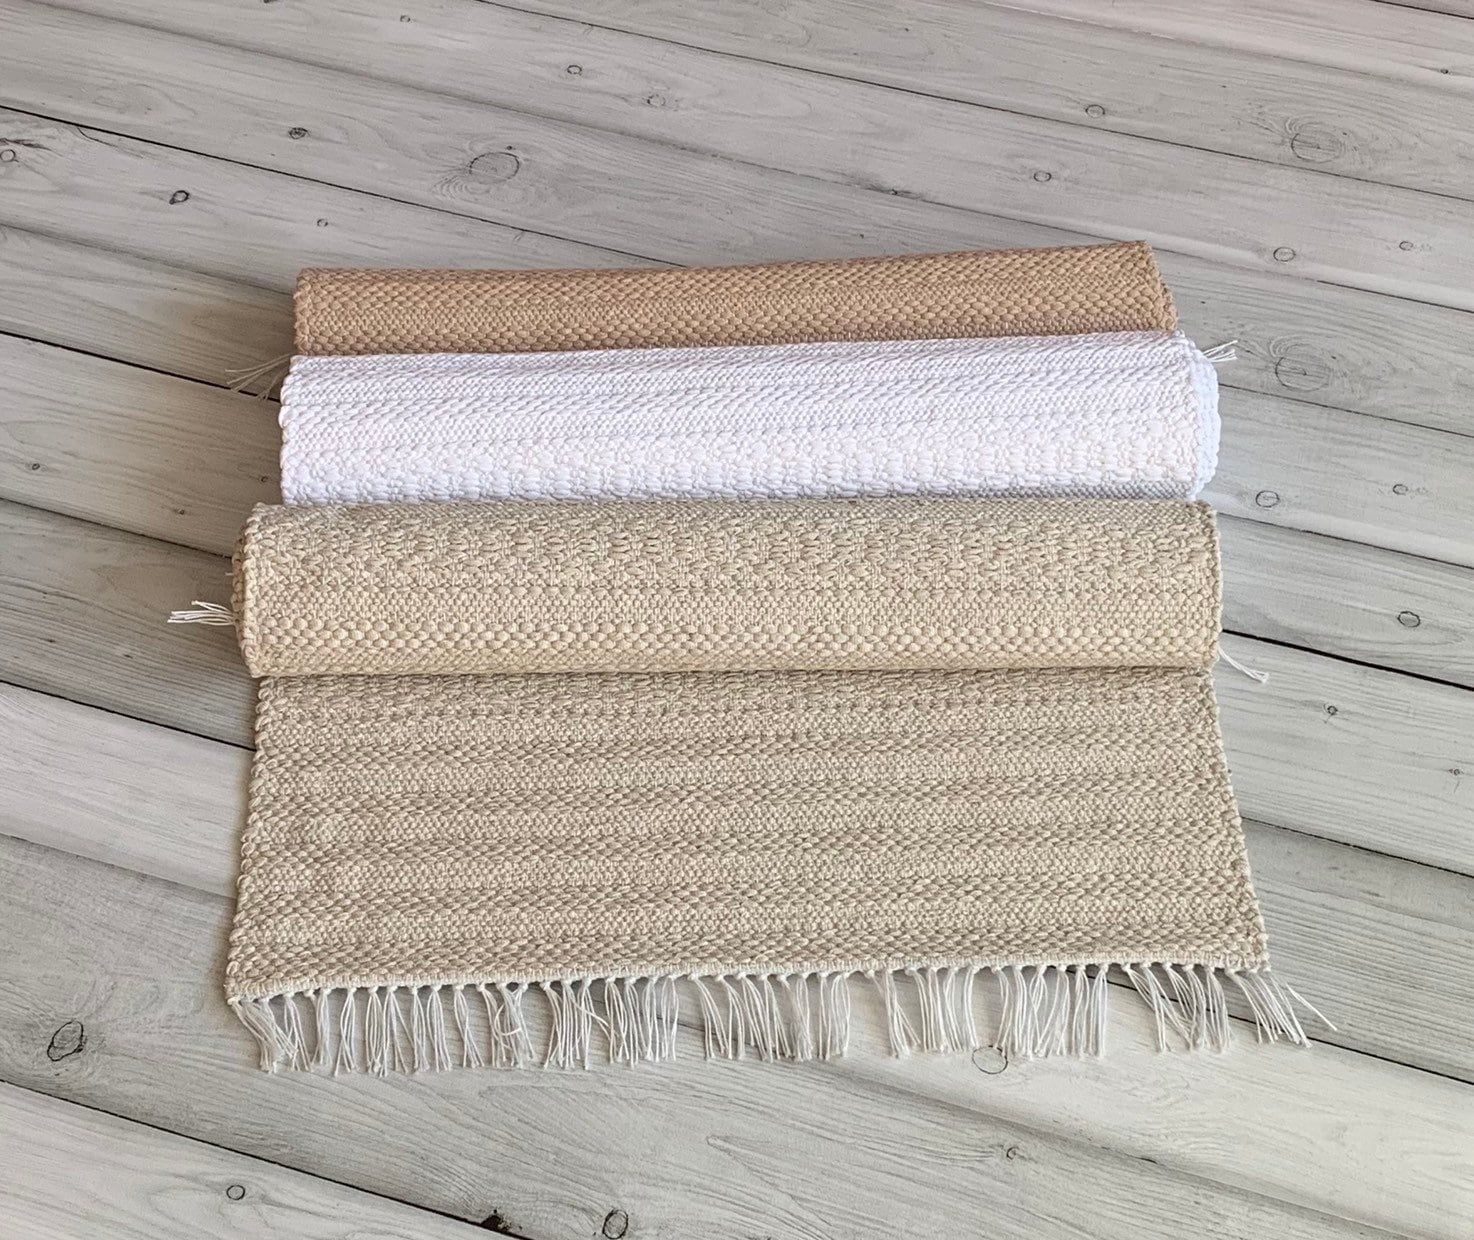 Rag Rug Washable Scandinavian Rug Cotton Rug Woven Runner – Etsy Within Cotton Runner Rugs (View 2 of 15)